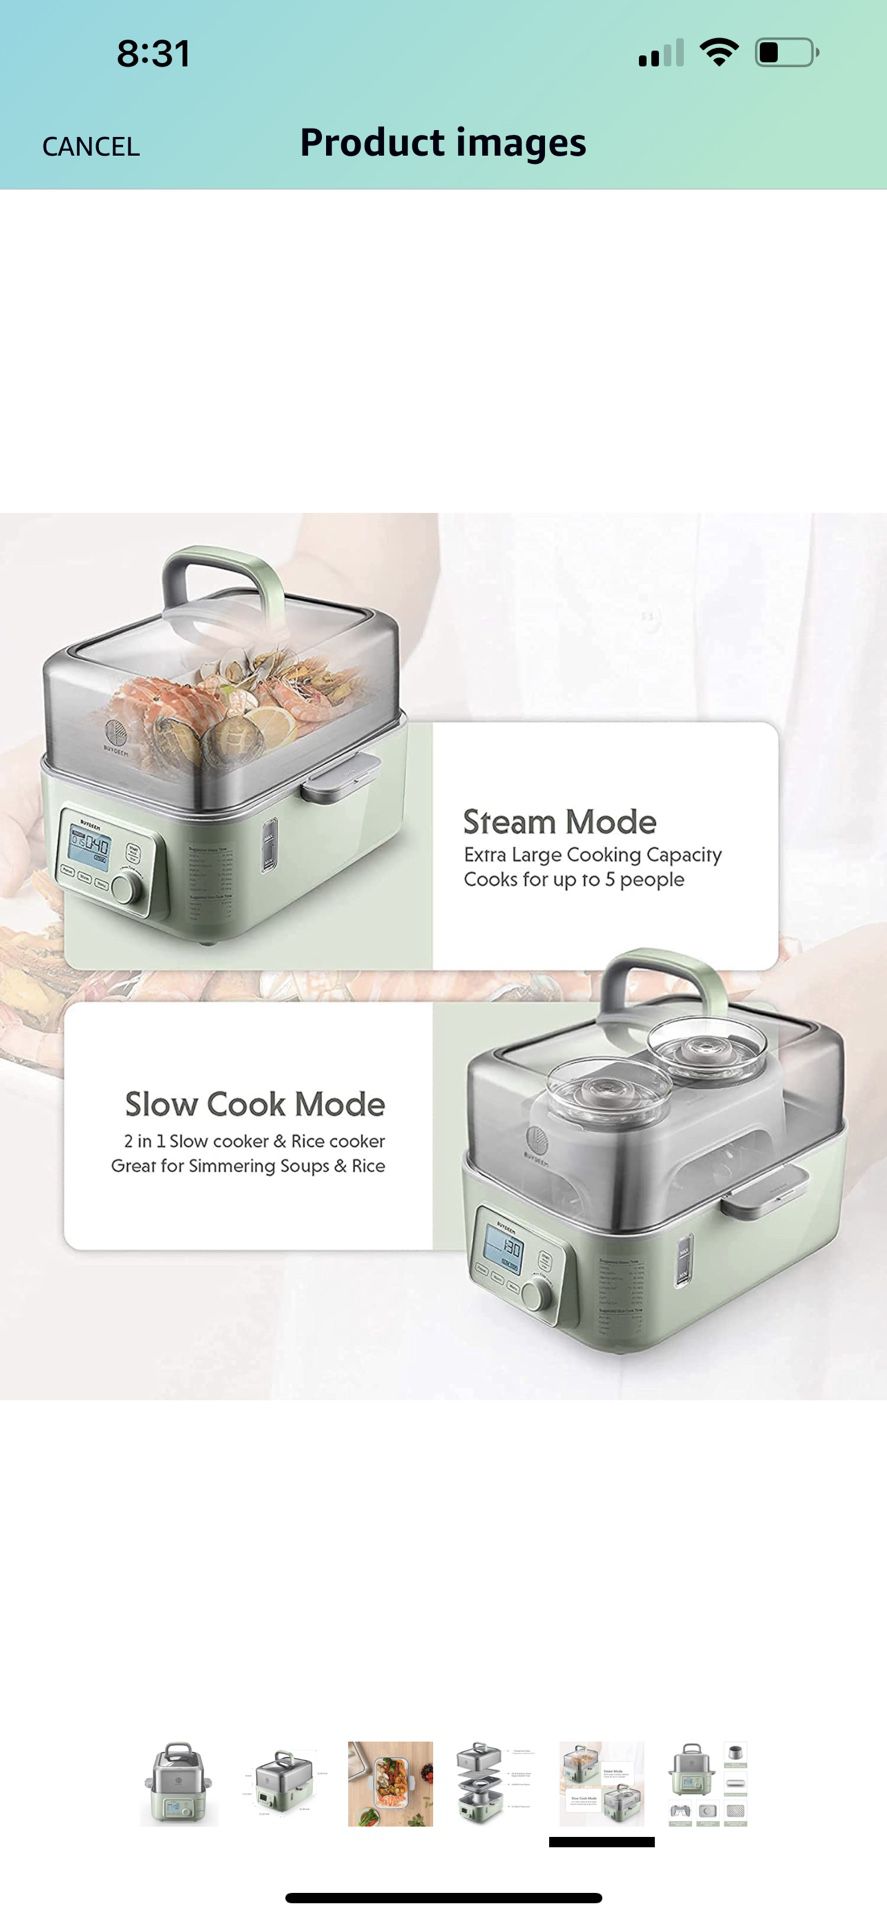 5-Quart Electric Food Steamer for Cooking, One Touch Vegetable Steamer, Digital Multifunctional Steamer, Quick Steam in 60s, Stainless Steel Stea